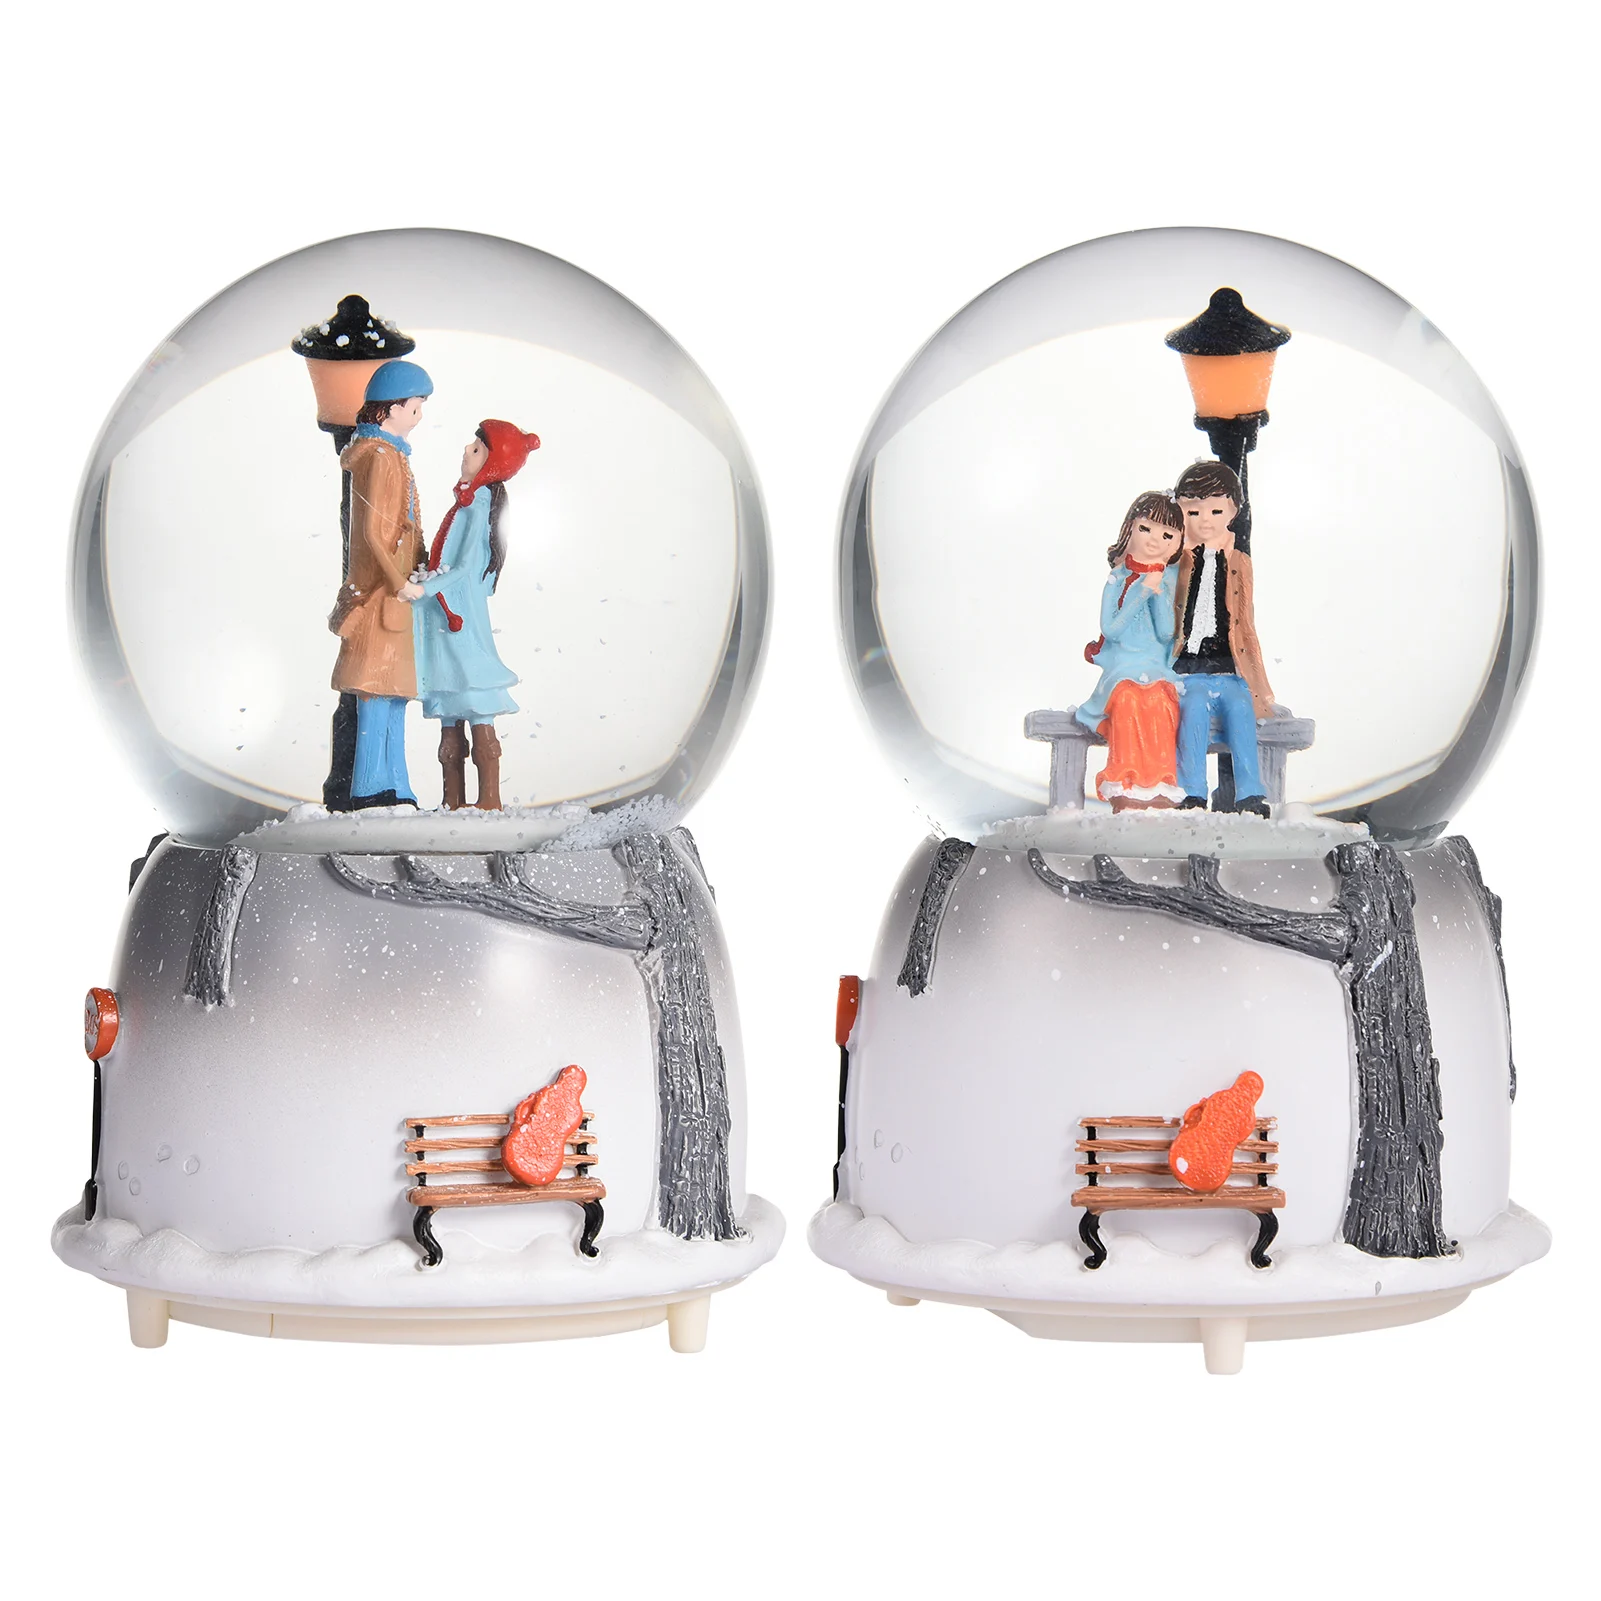 

Couple Crystal Ball Music Box Collectible Musical Crystal Ball Perfect Valentine's Day Gifts With Snowing Effect